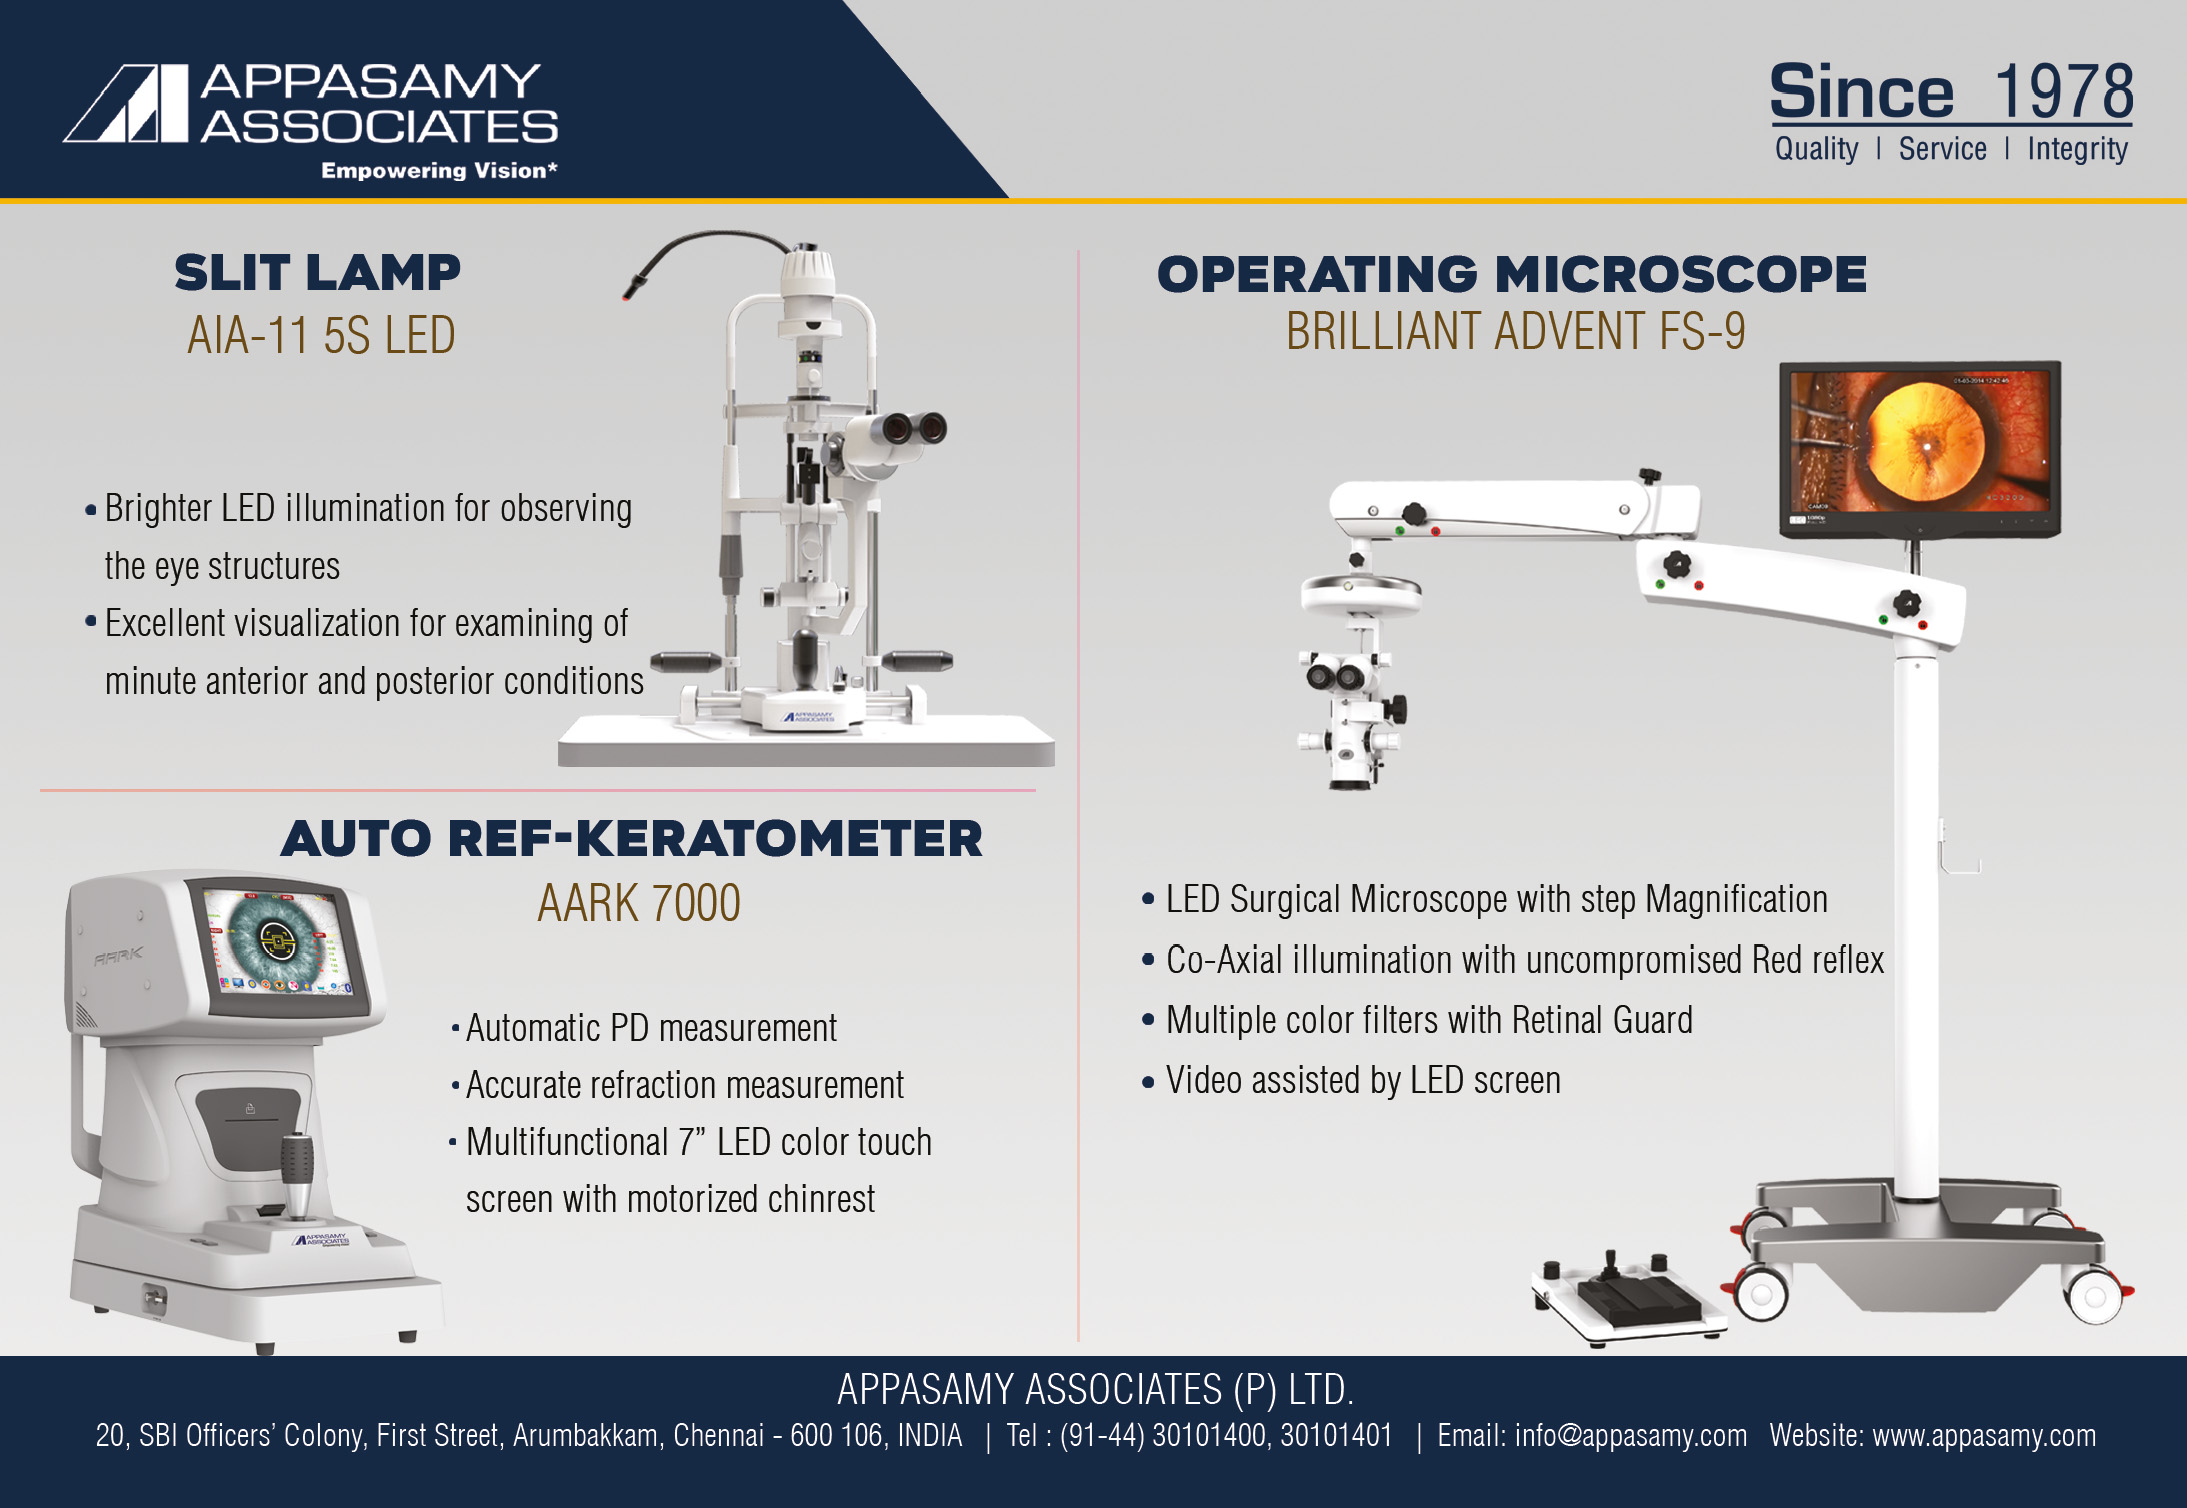 Advert for Appasamy Associates featuring some of their products: a slit lamp, an auto-ref keratometer and an operating microscope